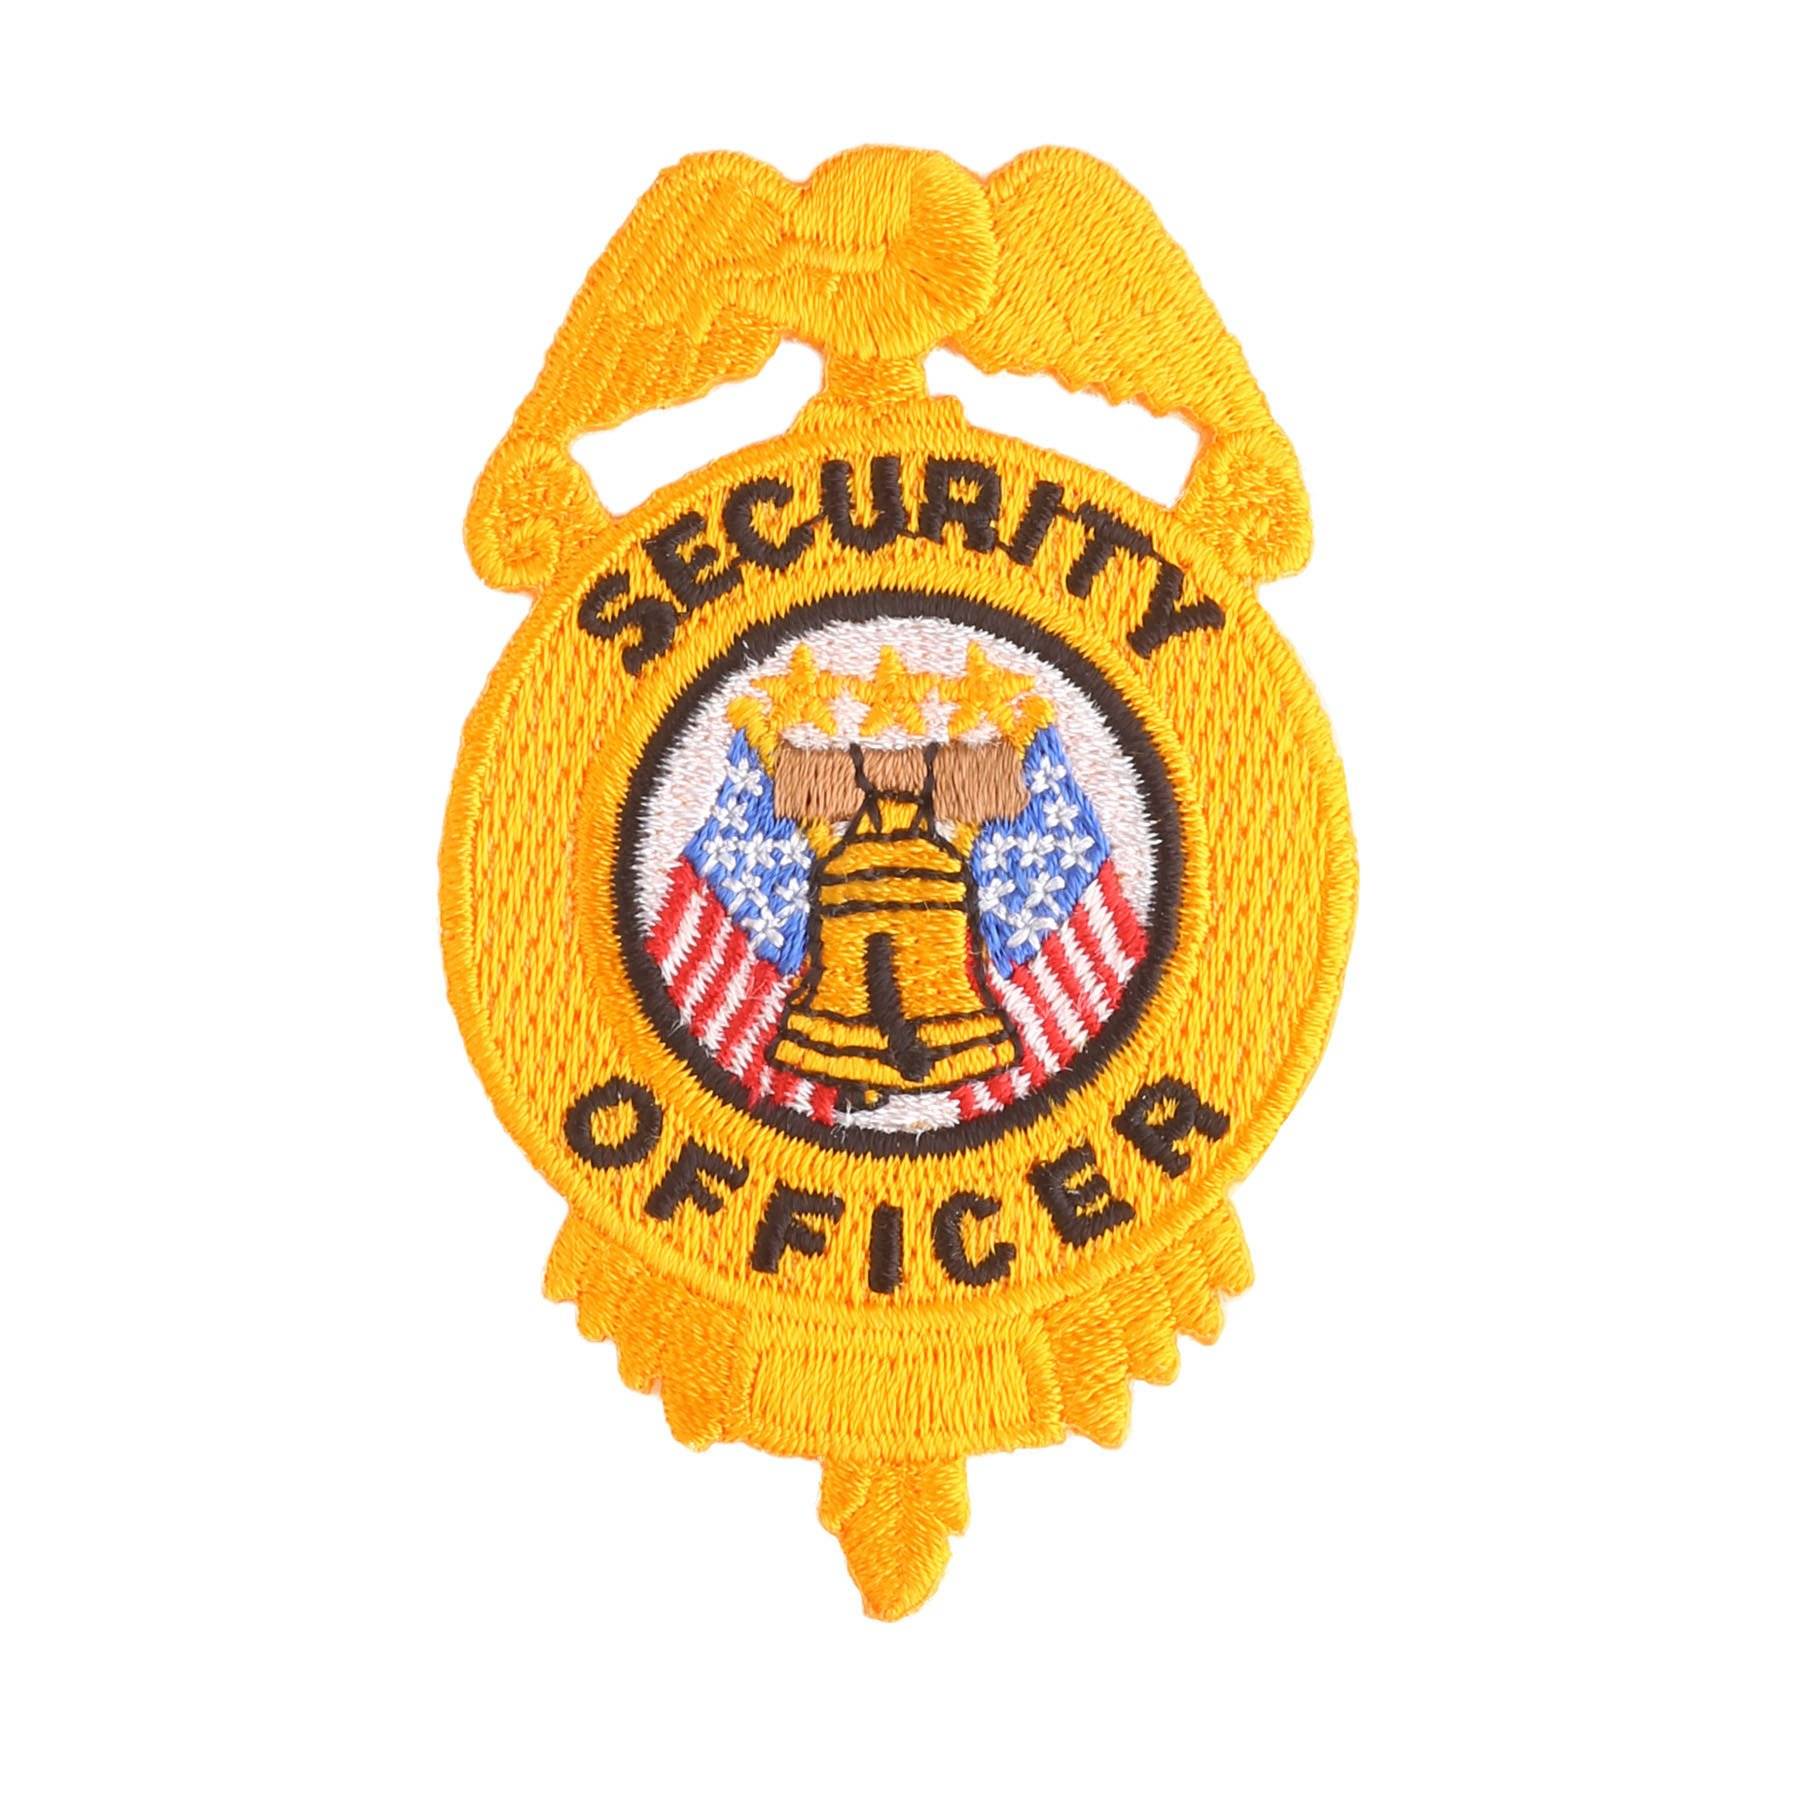 HERO'S PRIDE EMBROIDERED EAGLE SECURITY OFFICER PATCH